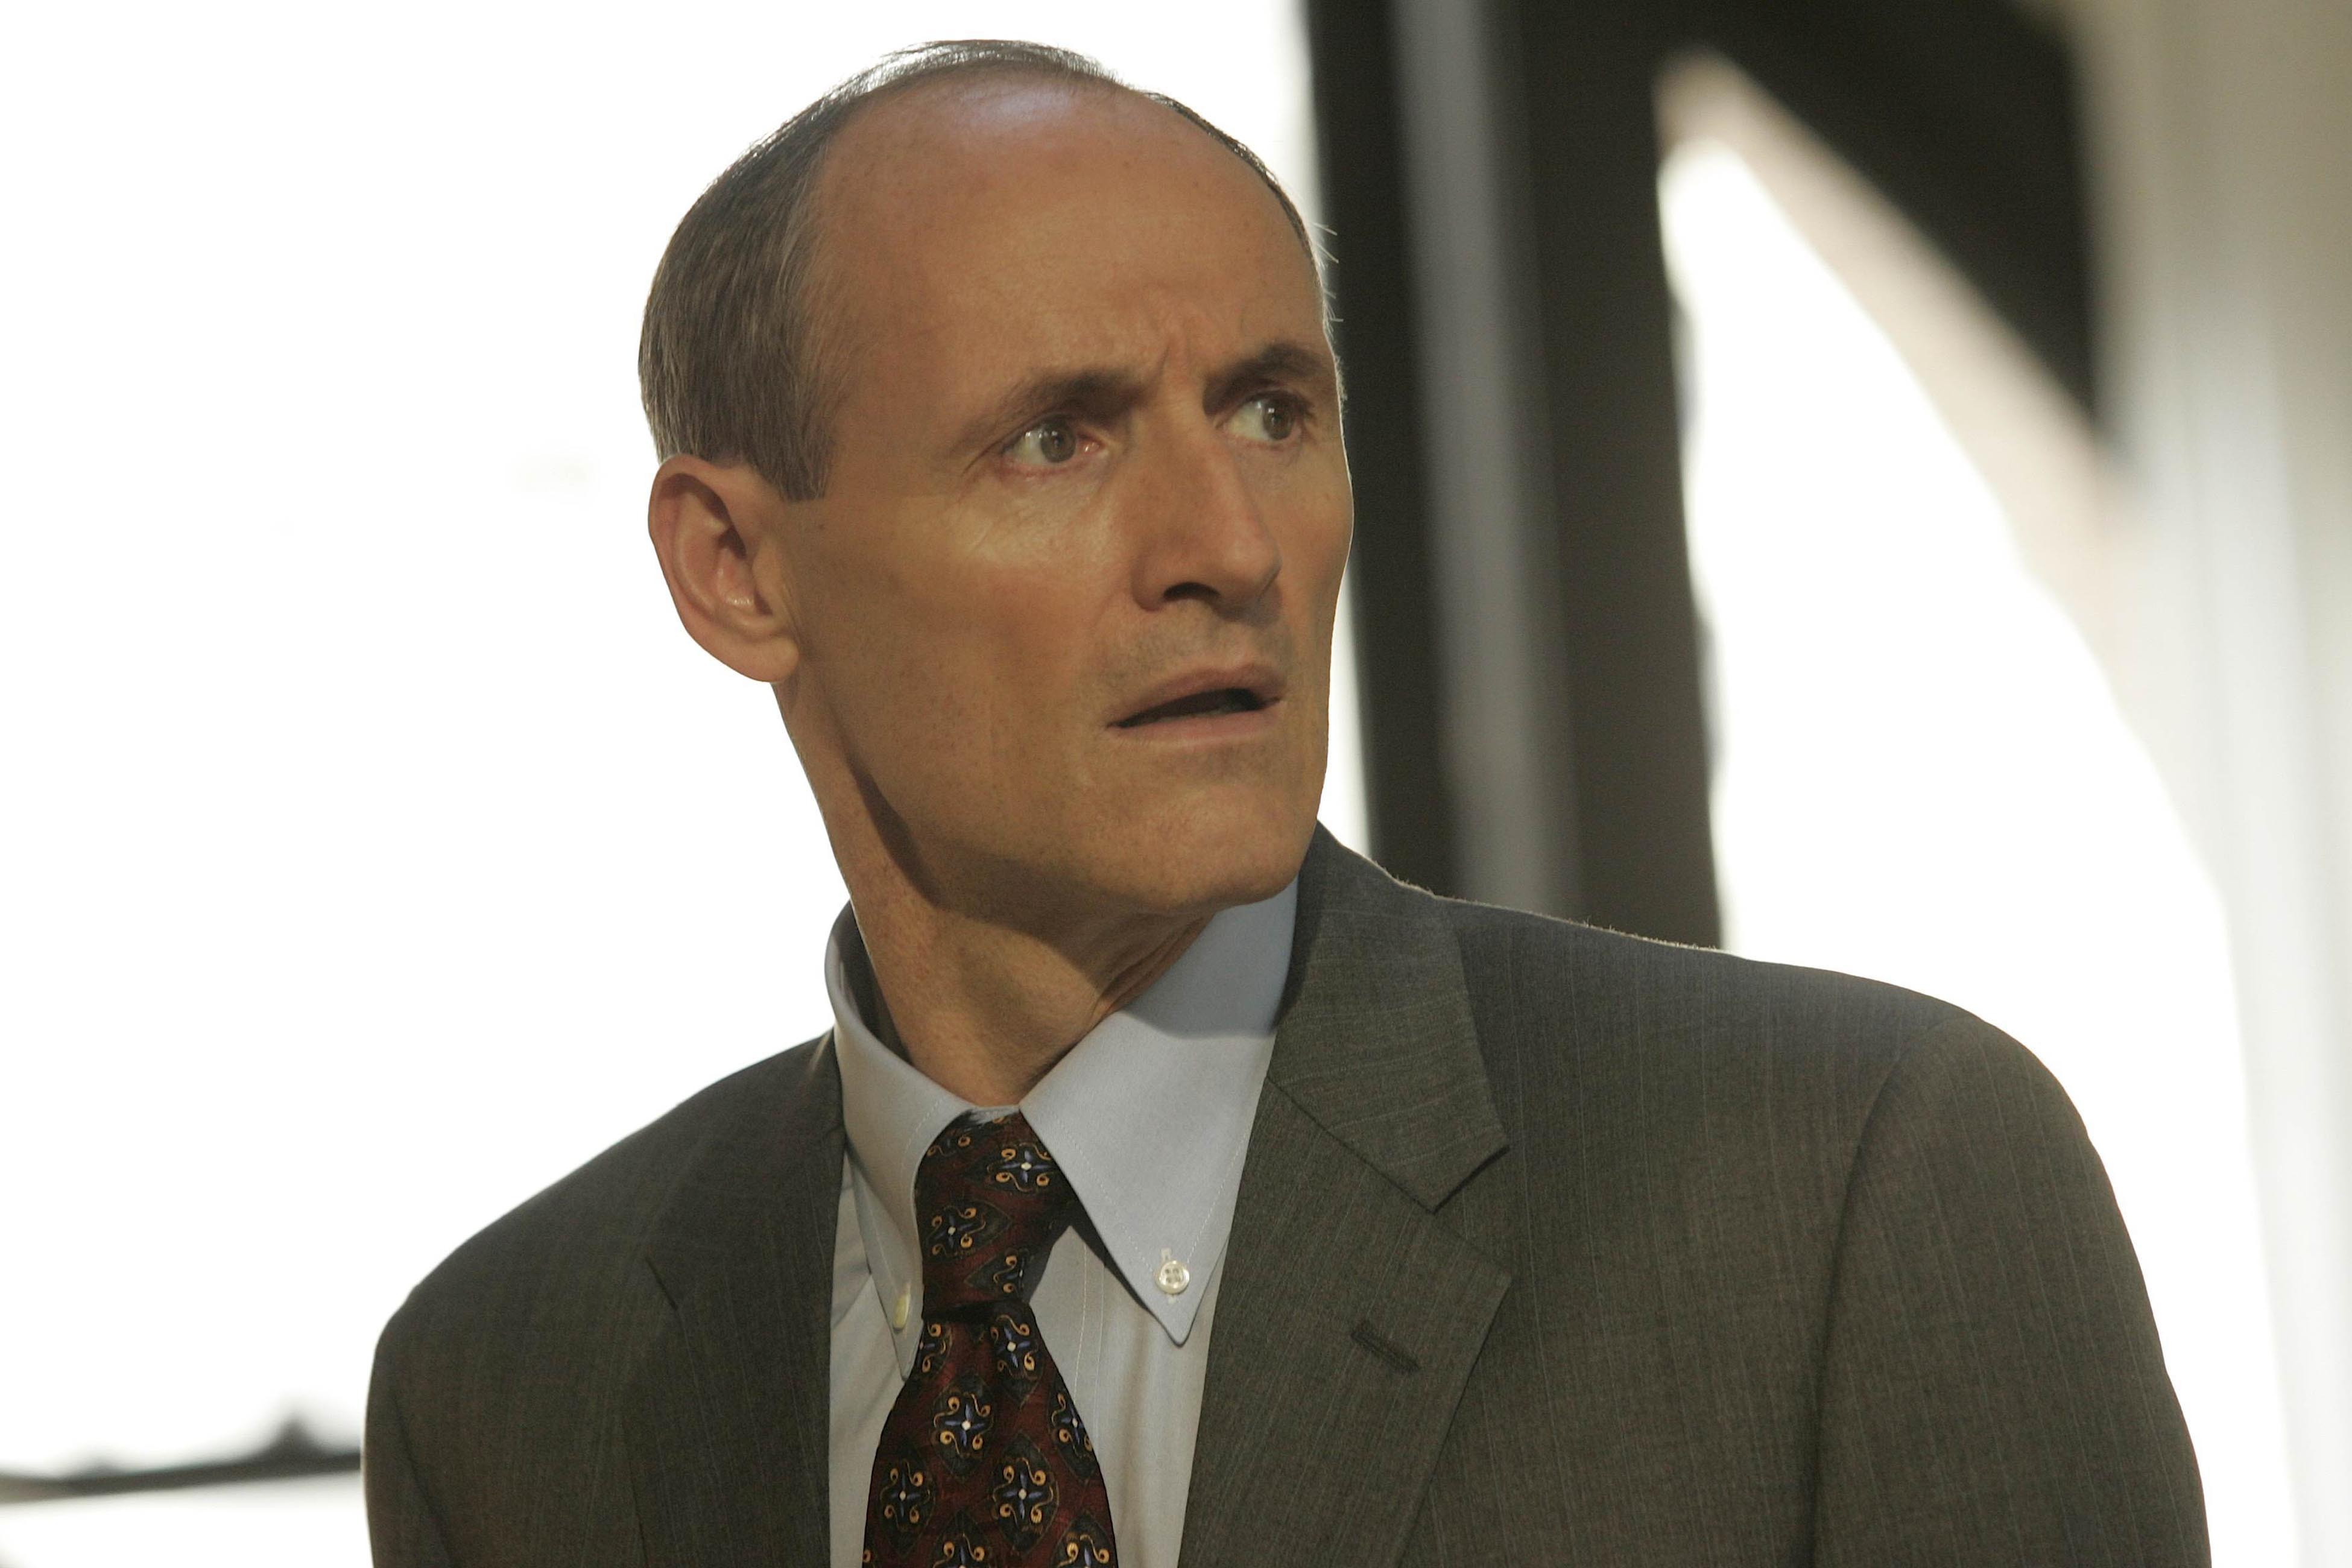 Movie News – Colm Feore cast as The Vulture in The Amazing Spider-Man 2